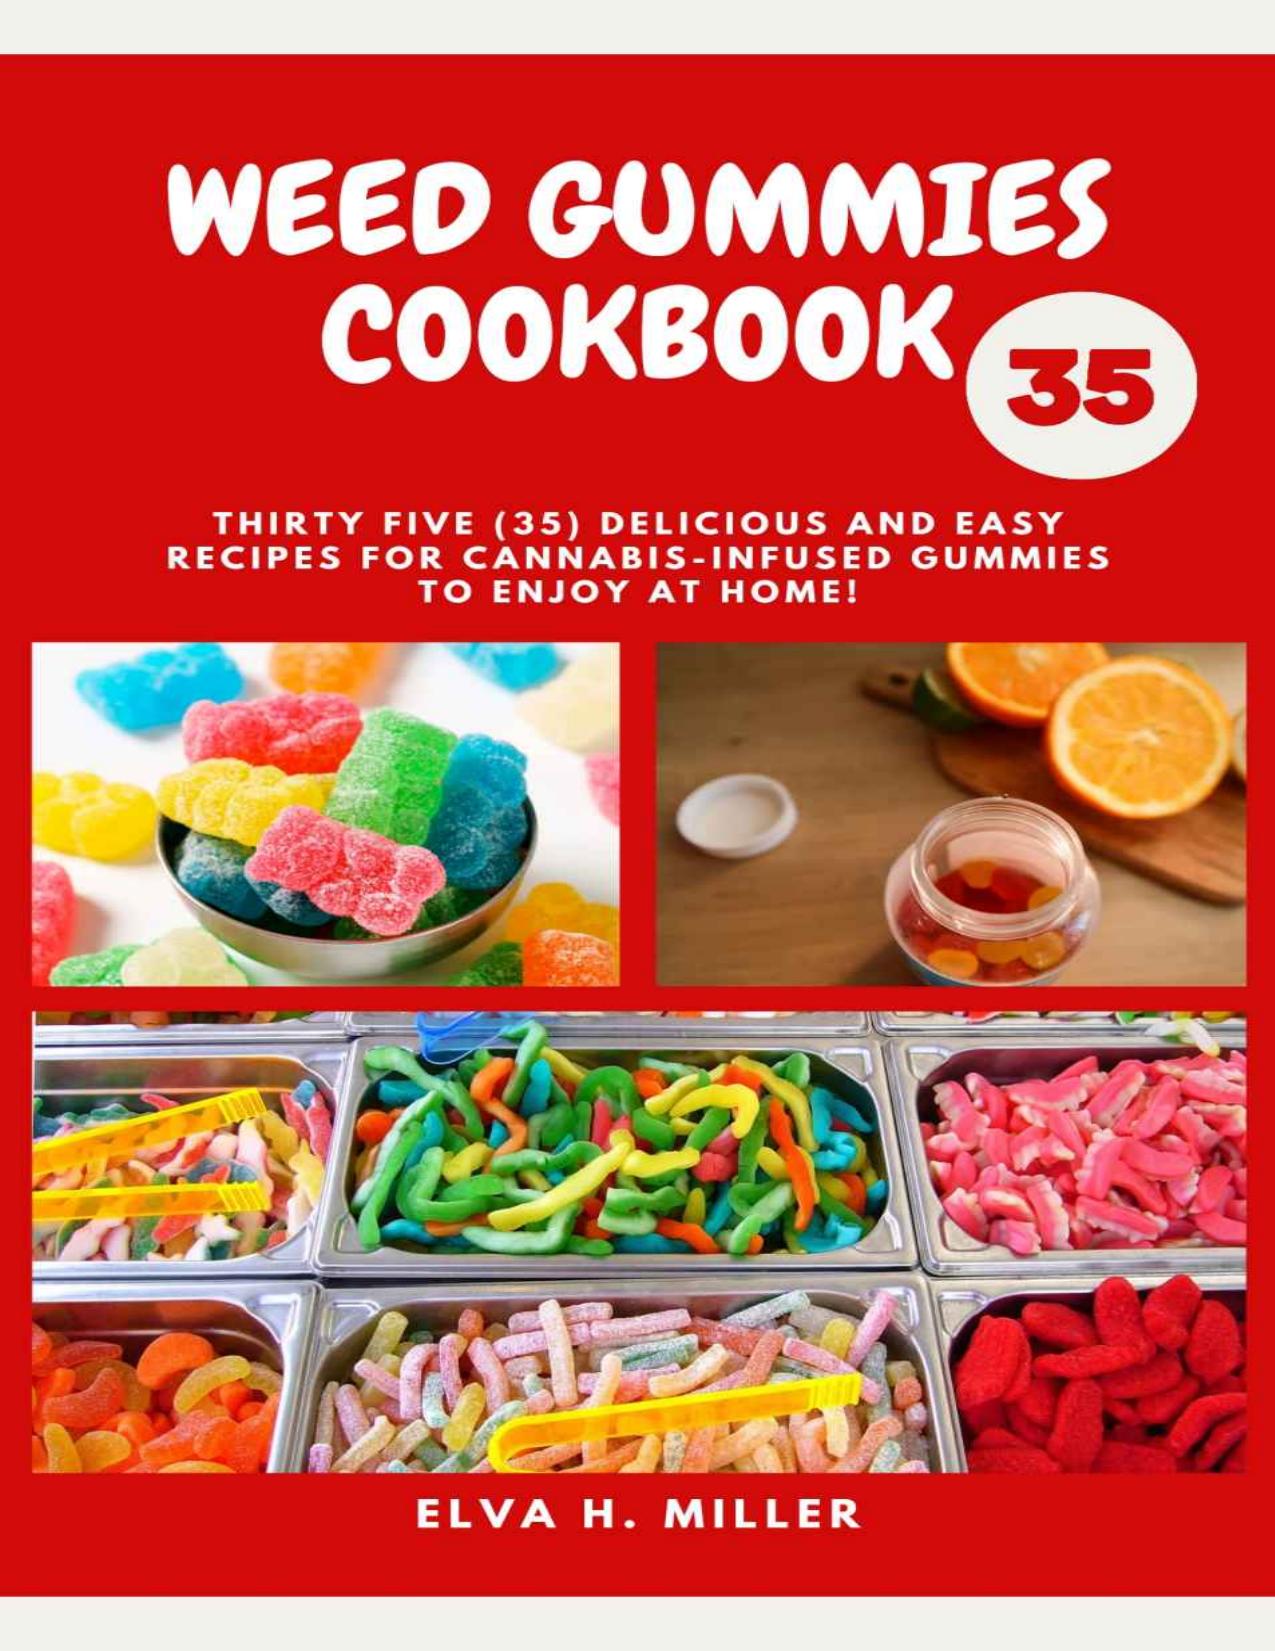 WEED GUMMIES COOKBOOK: Thirty Five (35) Delicious And Easy Recipes For Cannabis-Infused Gummies To Enjoy At Home by Elva H. Miller